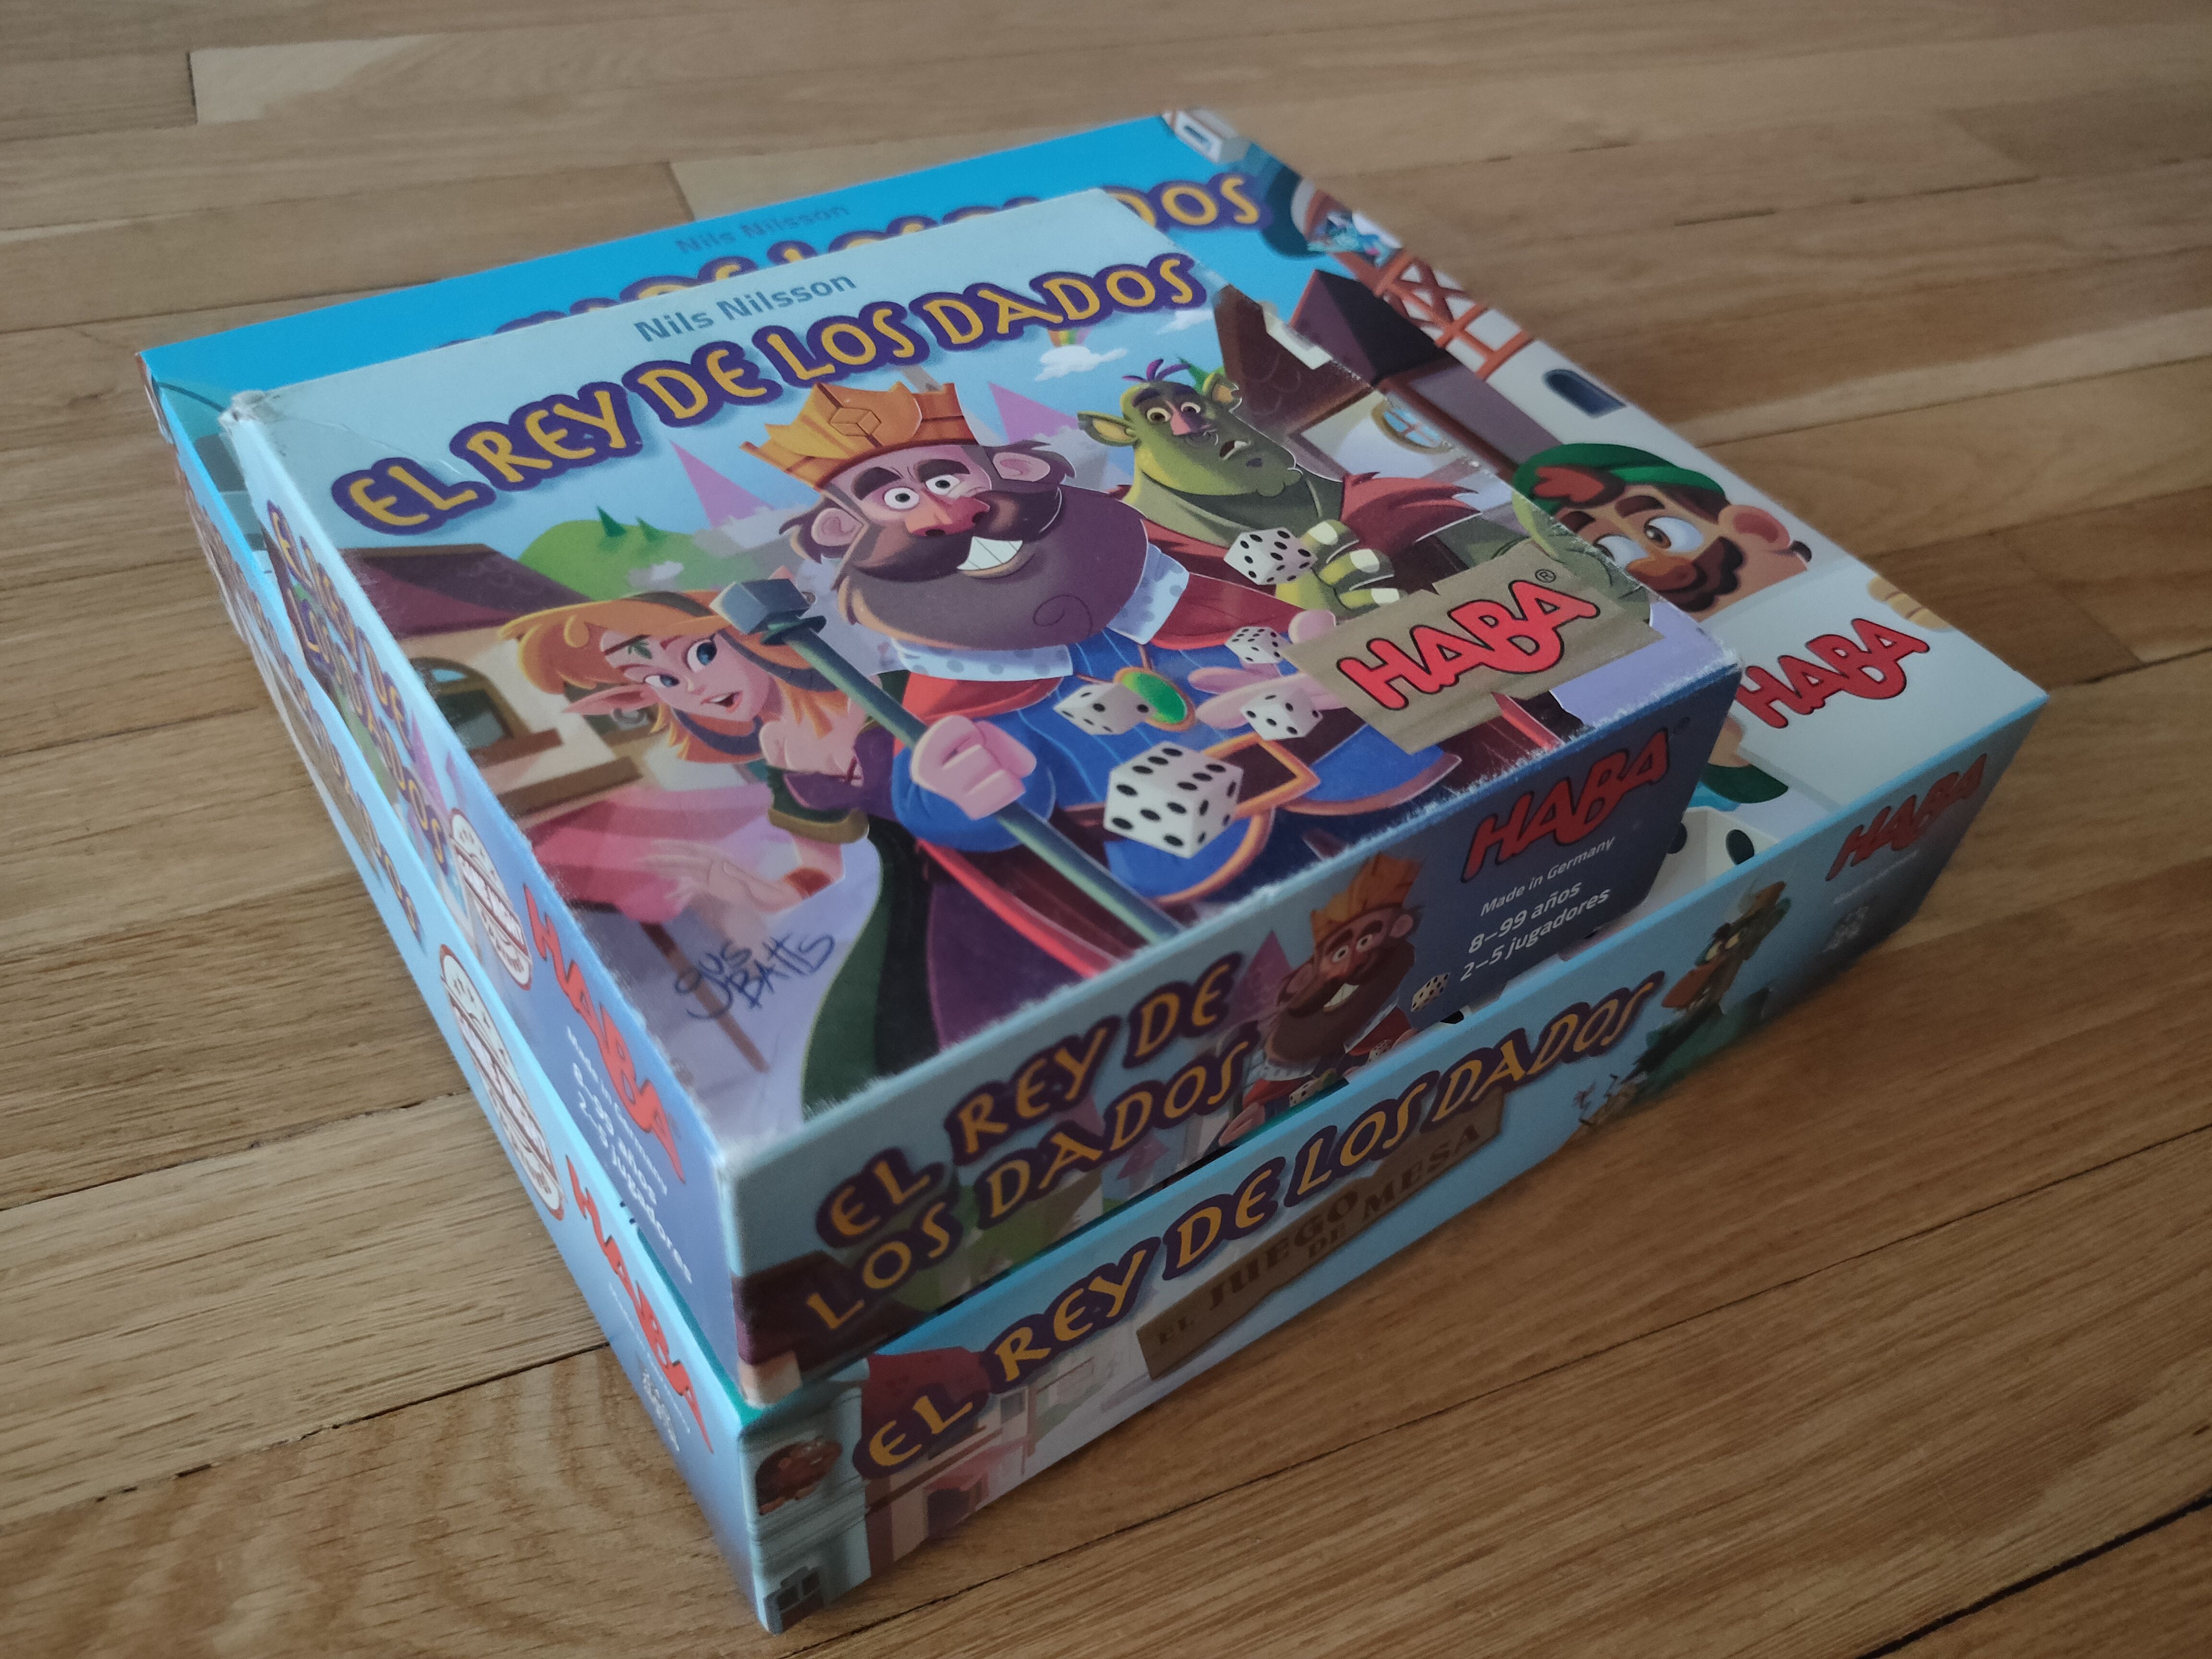 King of the Dice: The Board Game, Image